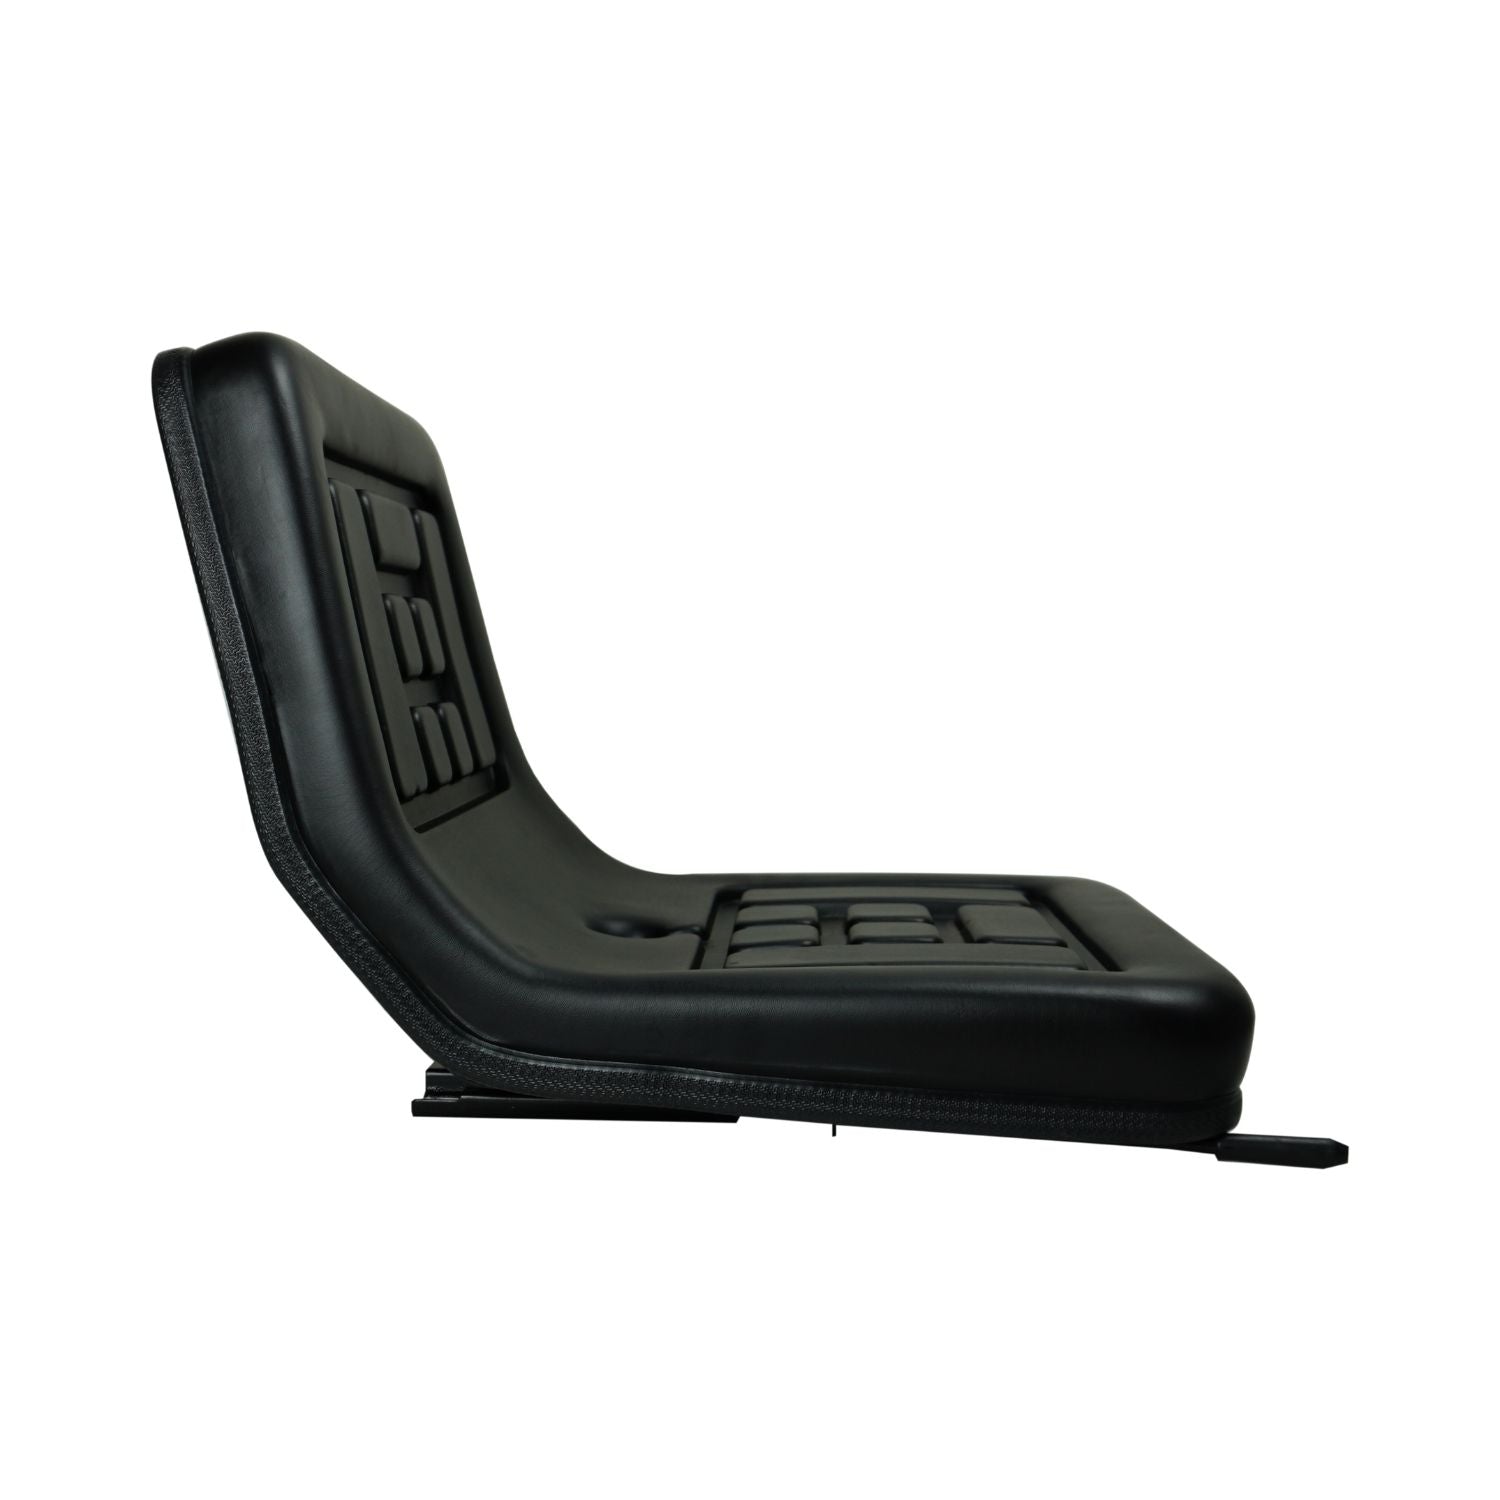 RYNOMATE Universal Tractor Seat with Easy Seat Adjustment (Black)